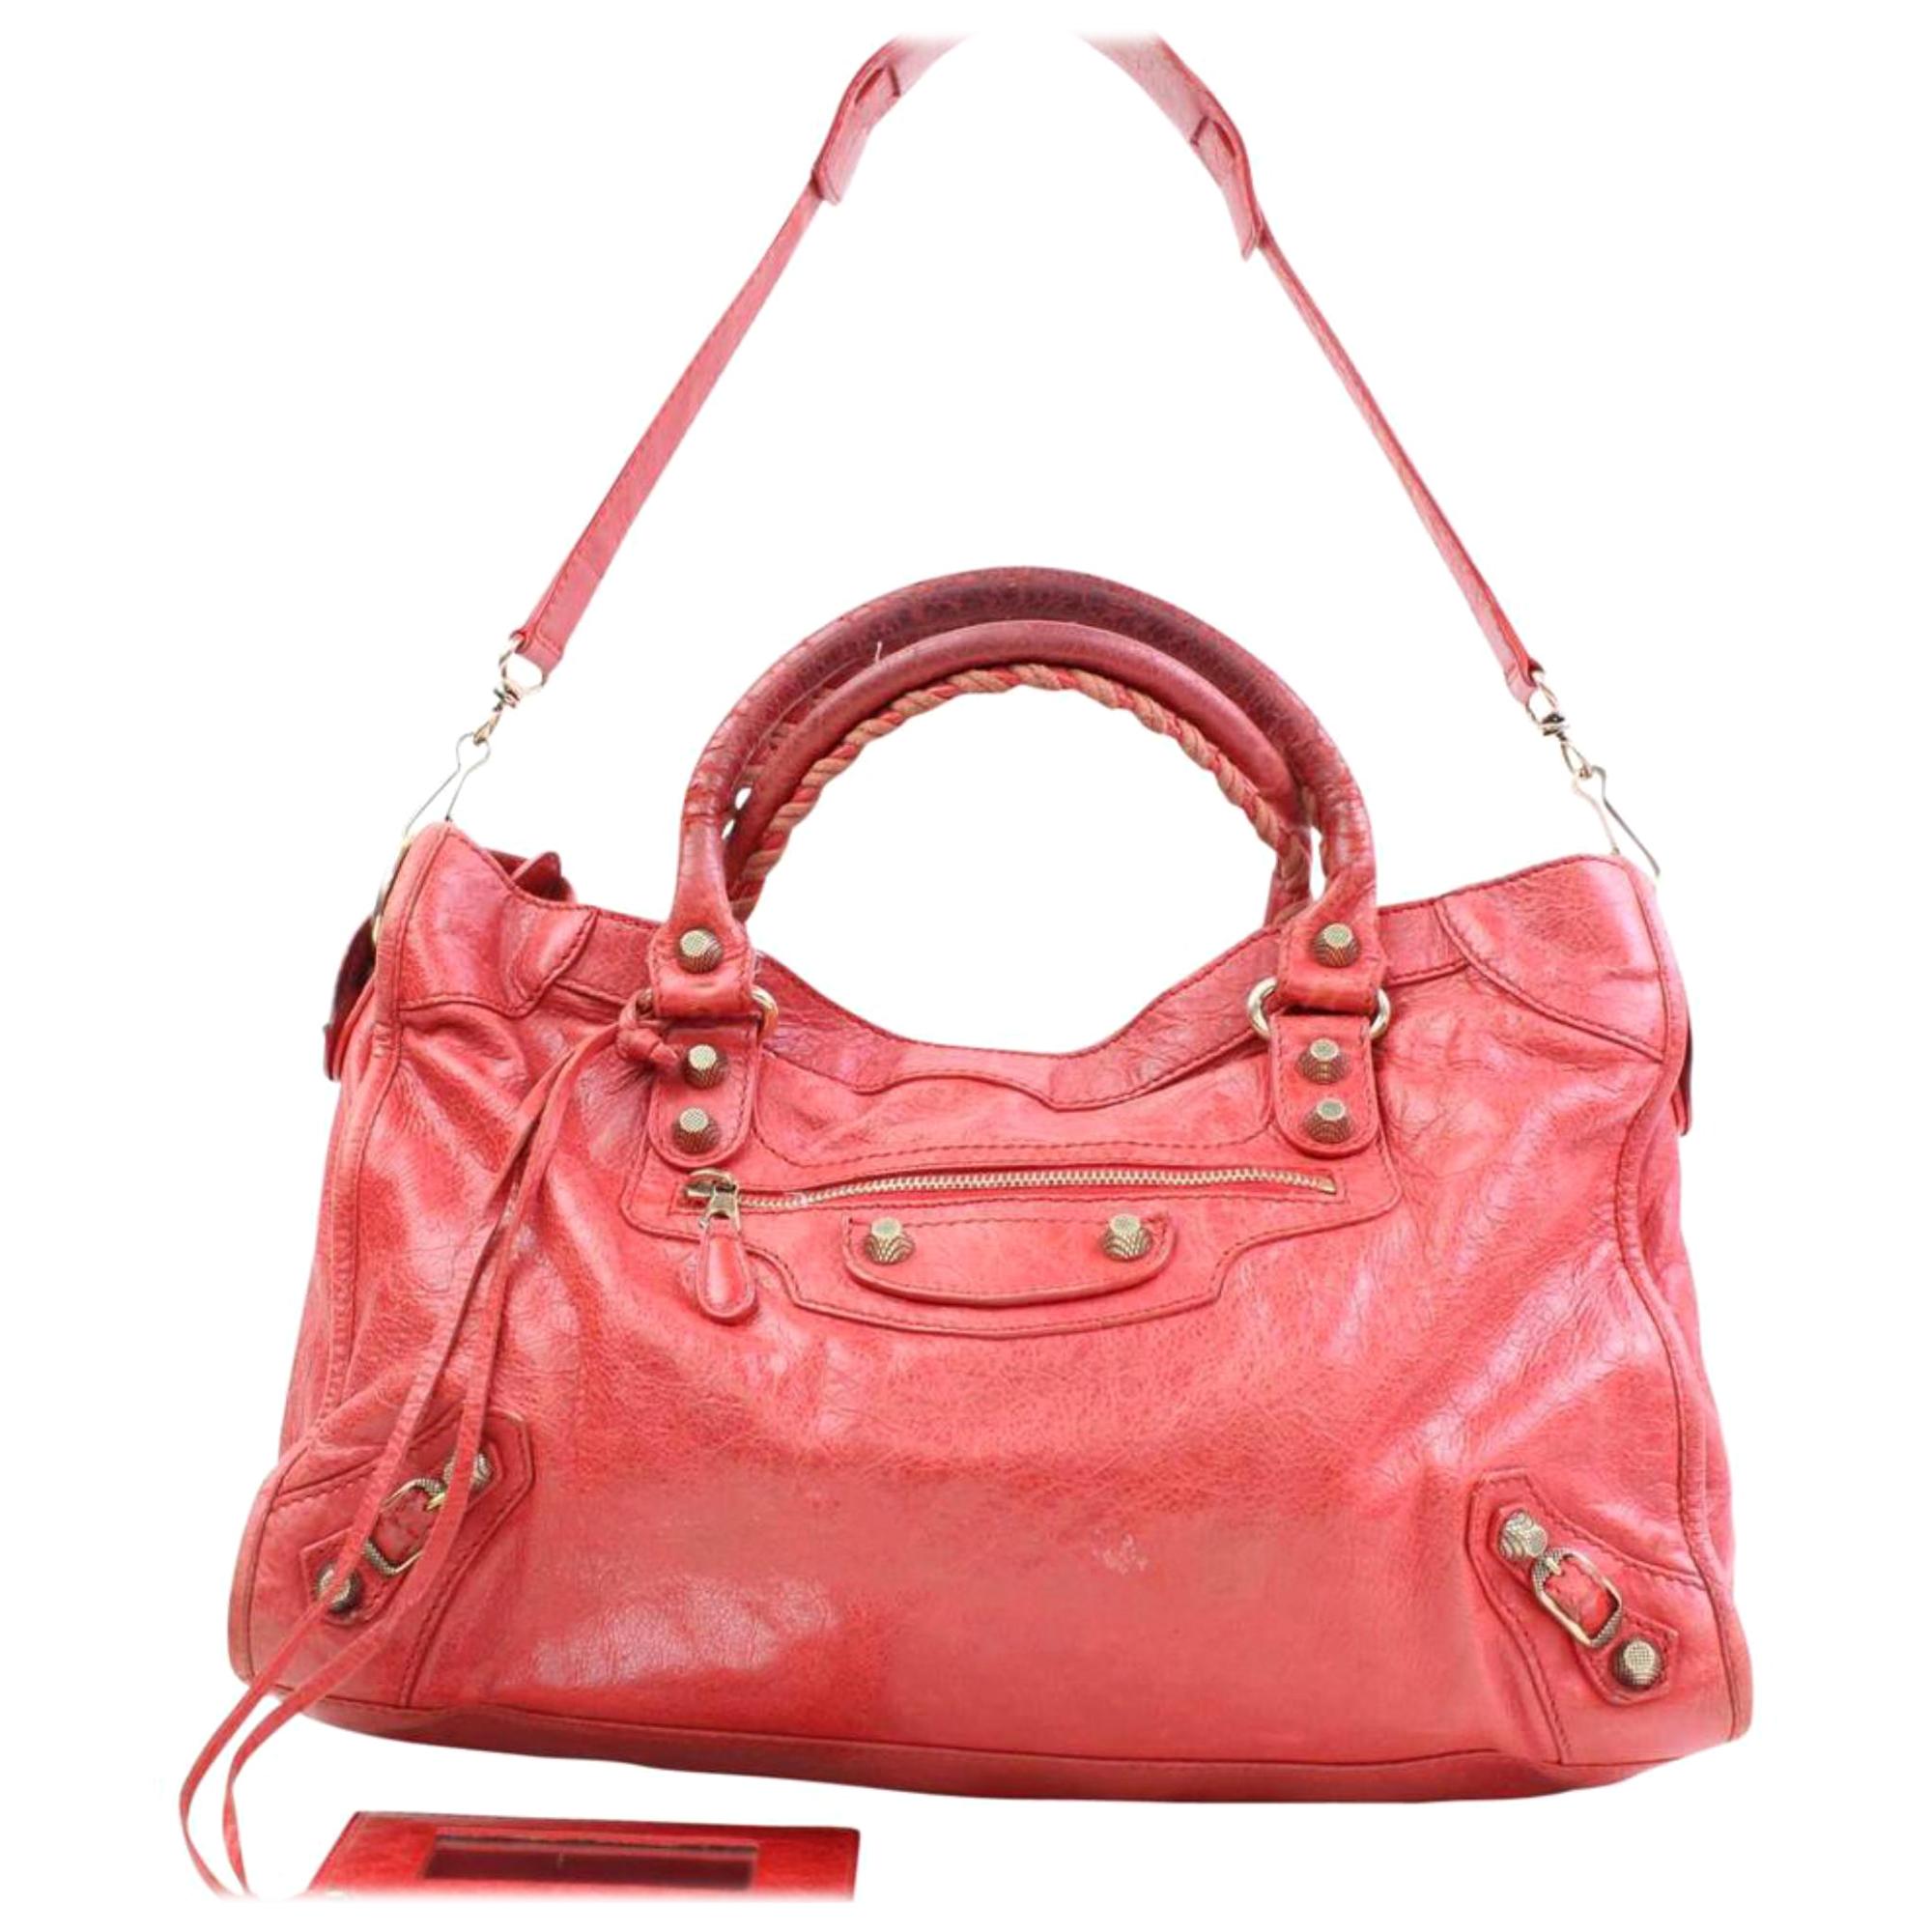 Balenciaga The City 2way 866491 Red Leather Shoulder Bag For Sale